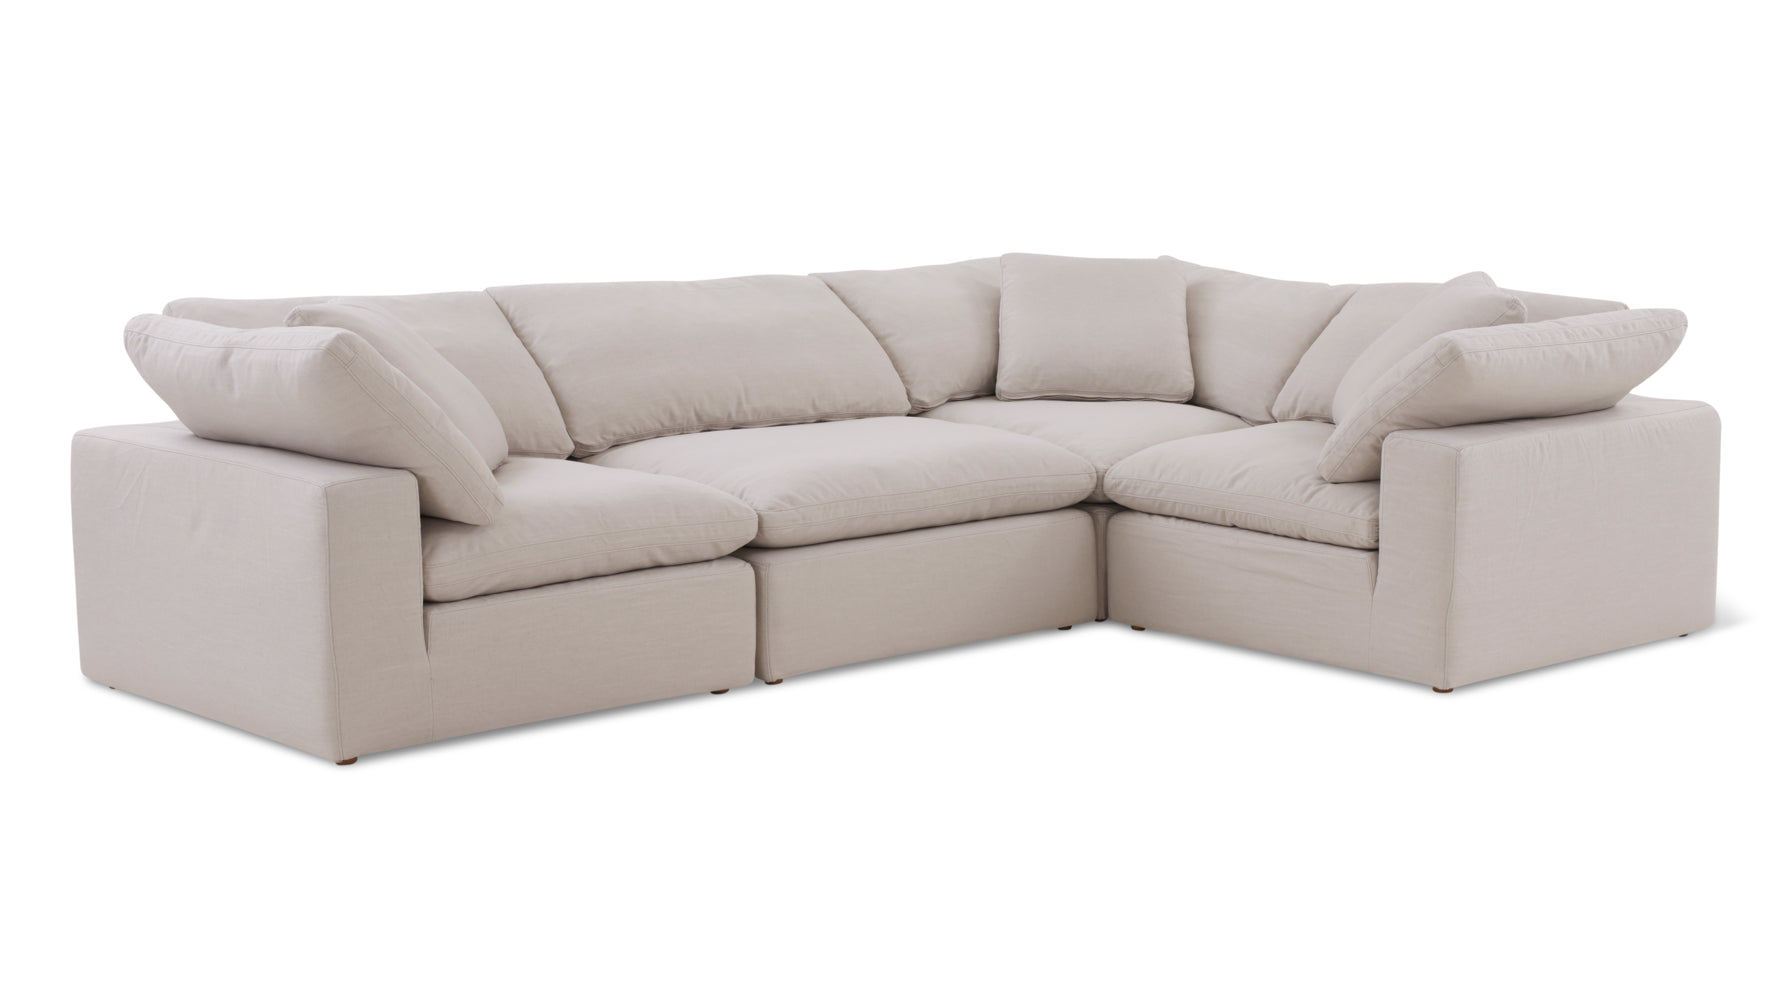 Movie Night™ 4-Piece Modular Sectional Closed, Large, Clay - Image 7